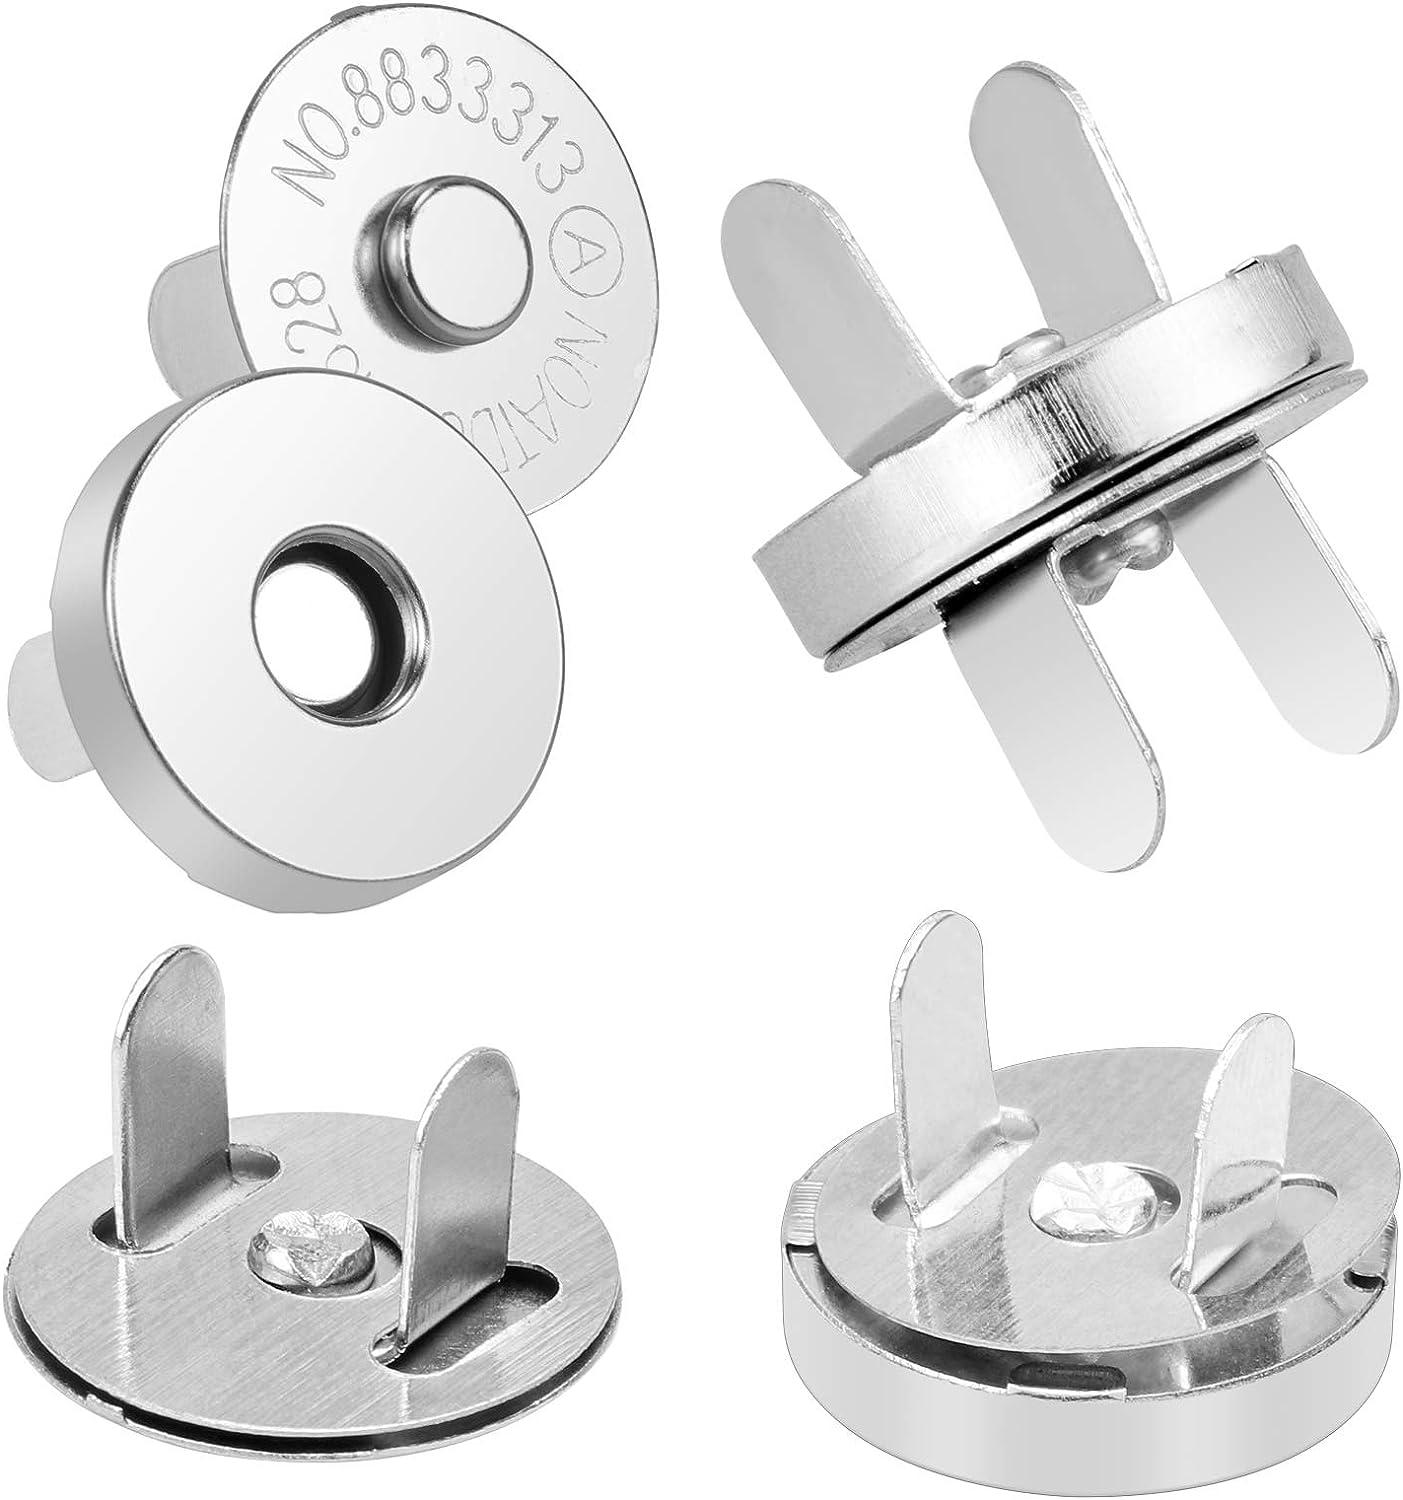  EXCEART 3 Sets Sewing Clasp Buttons snap Fasteners